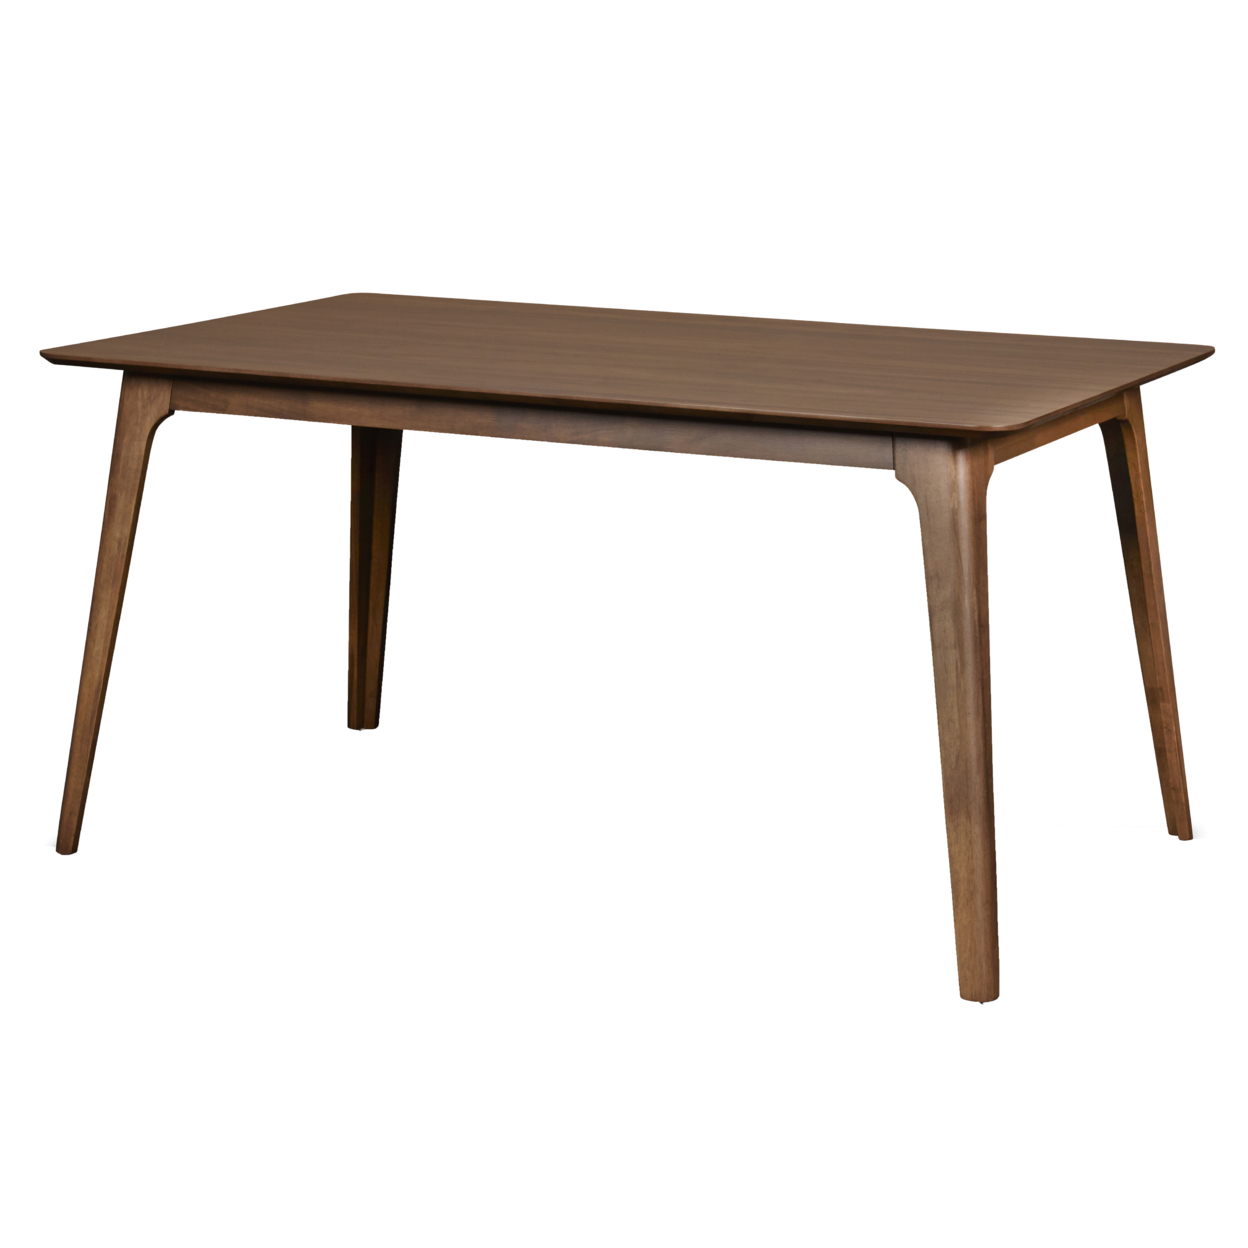 Wooden Table With Angled Block Legs And Natural Grain Texture, Brown- Saltoro Sherpi